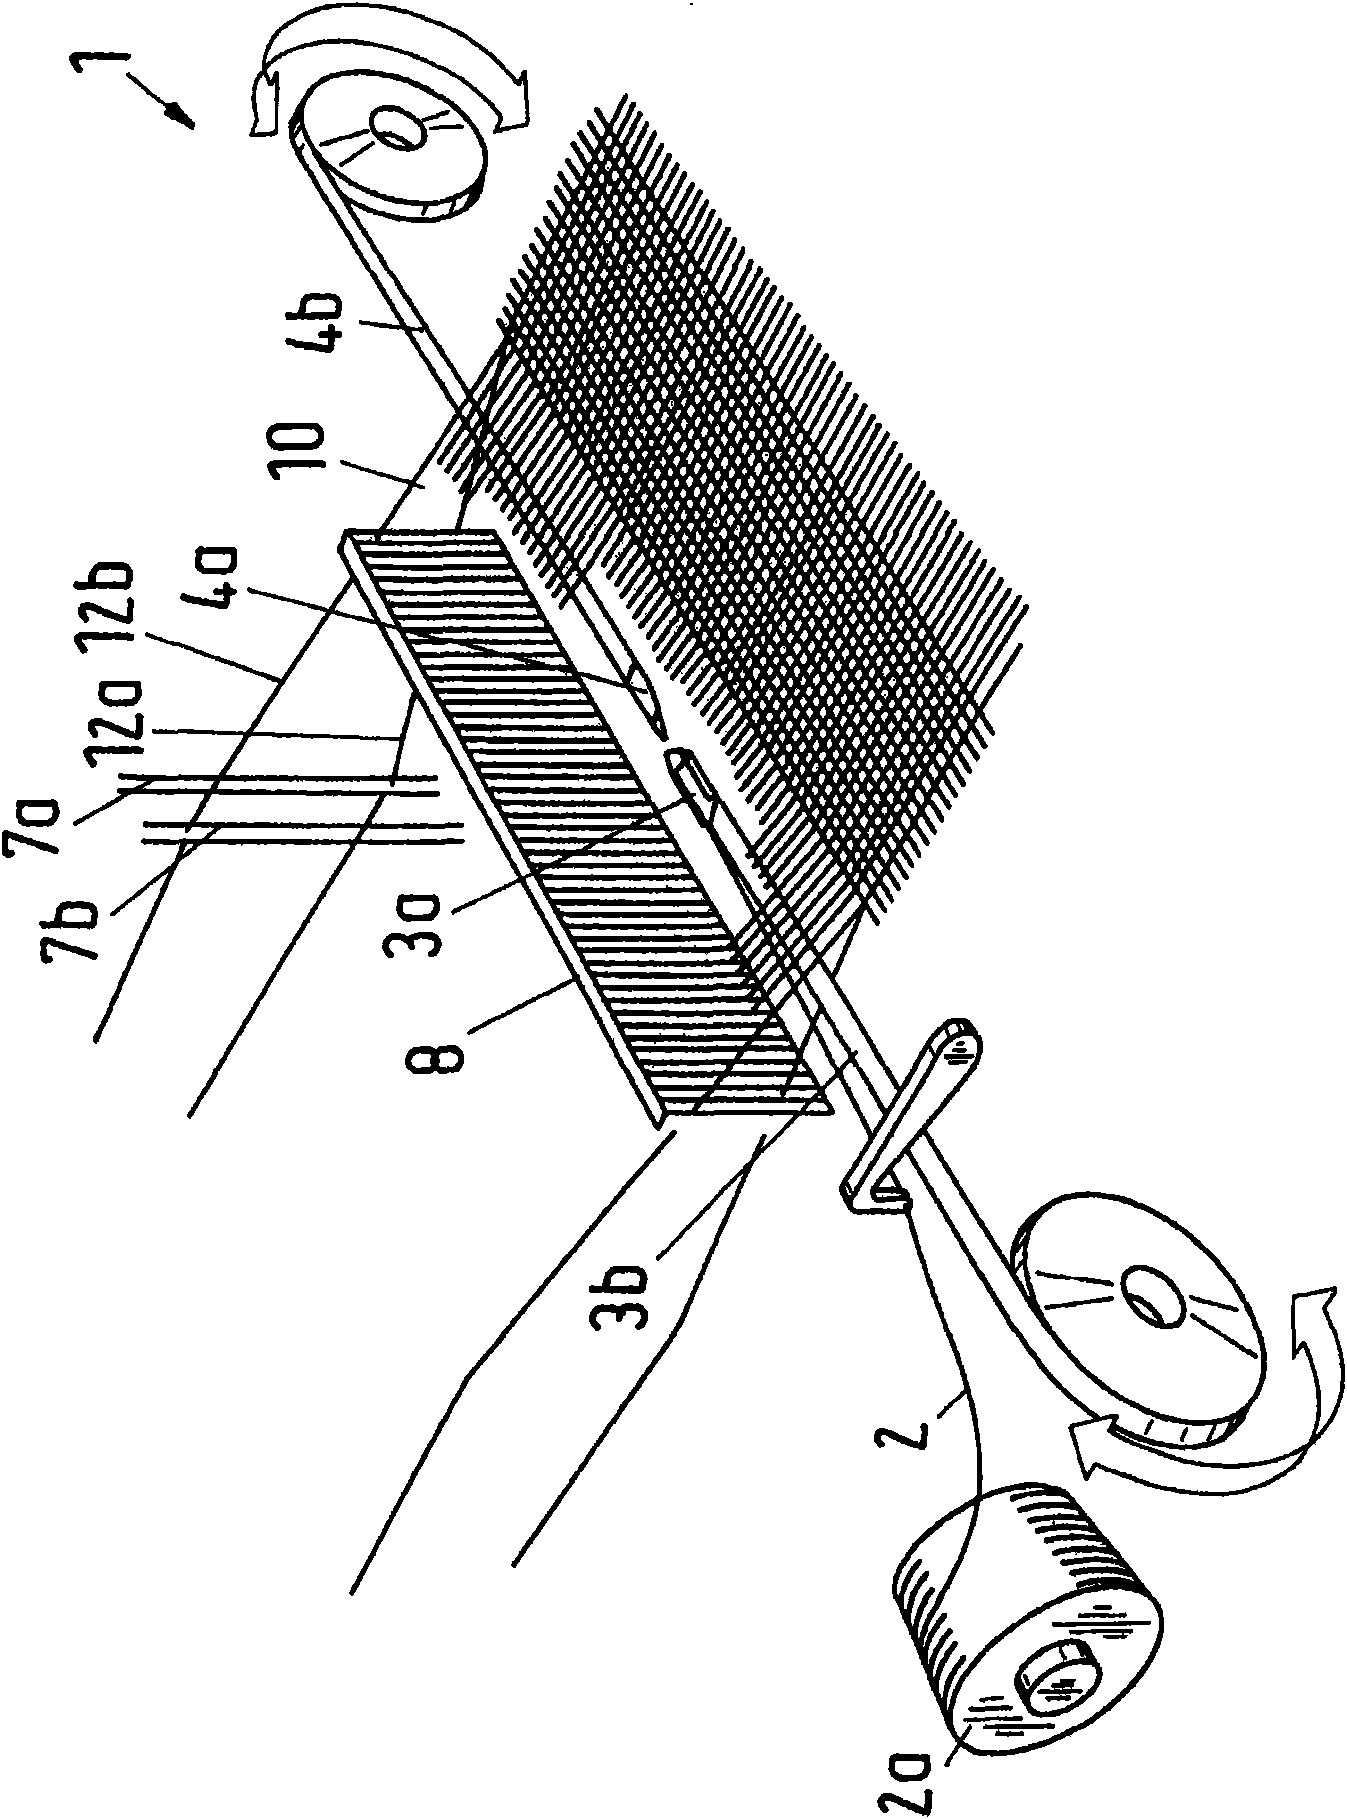 Method and device for inserting weft thread in a gripper loom